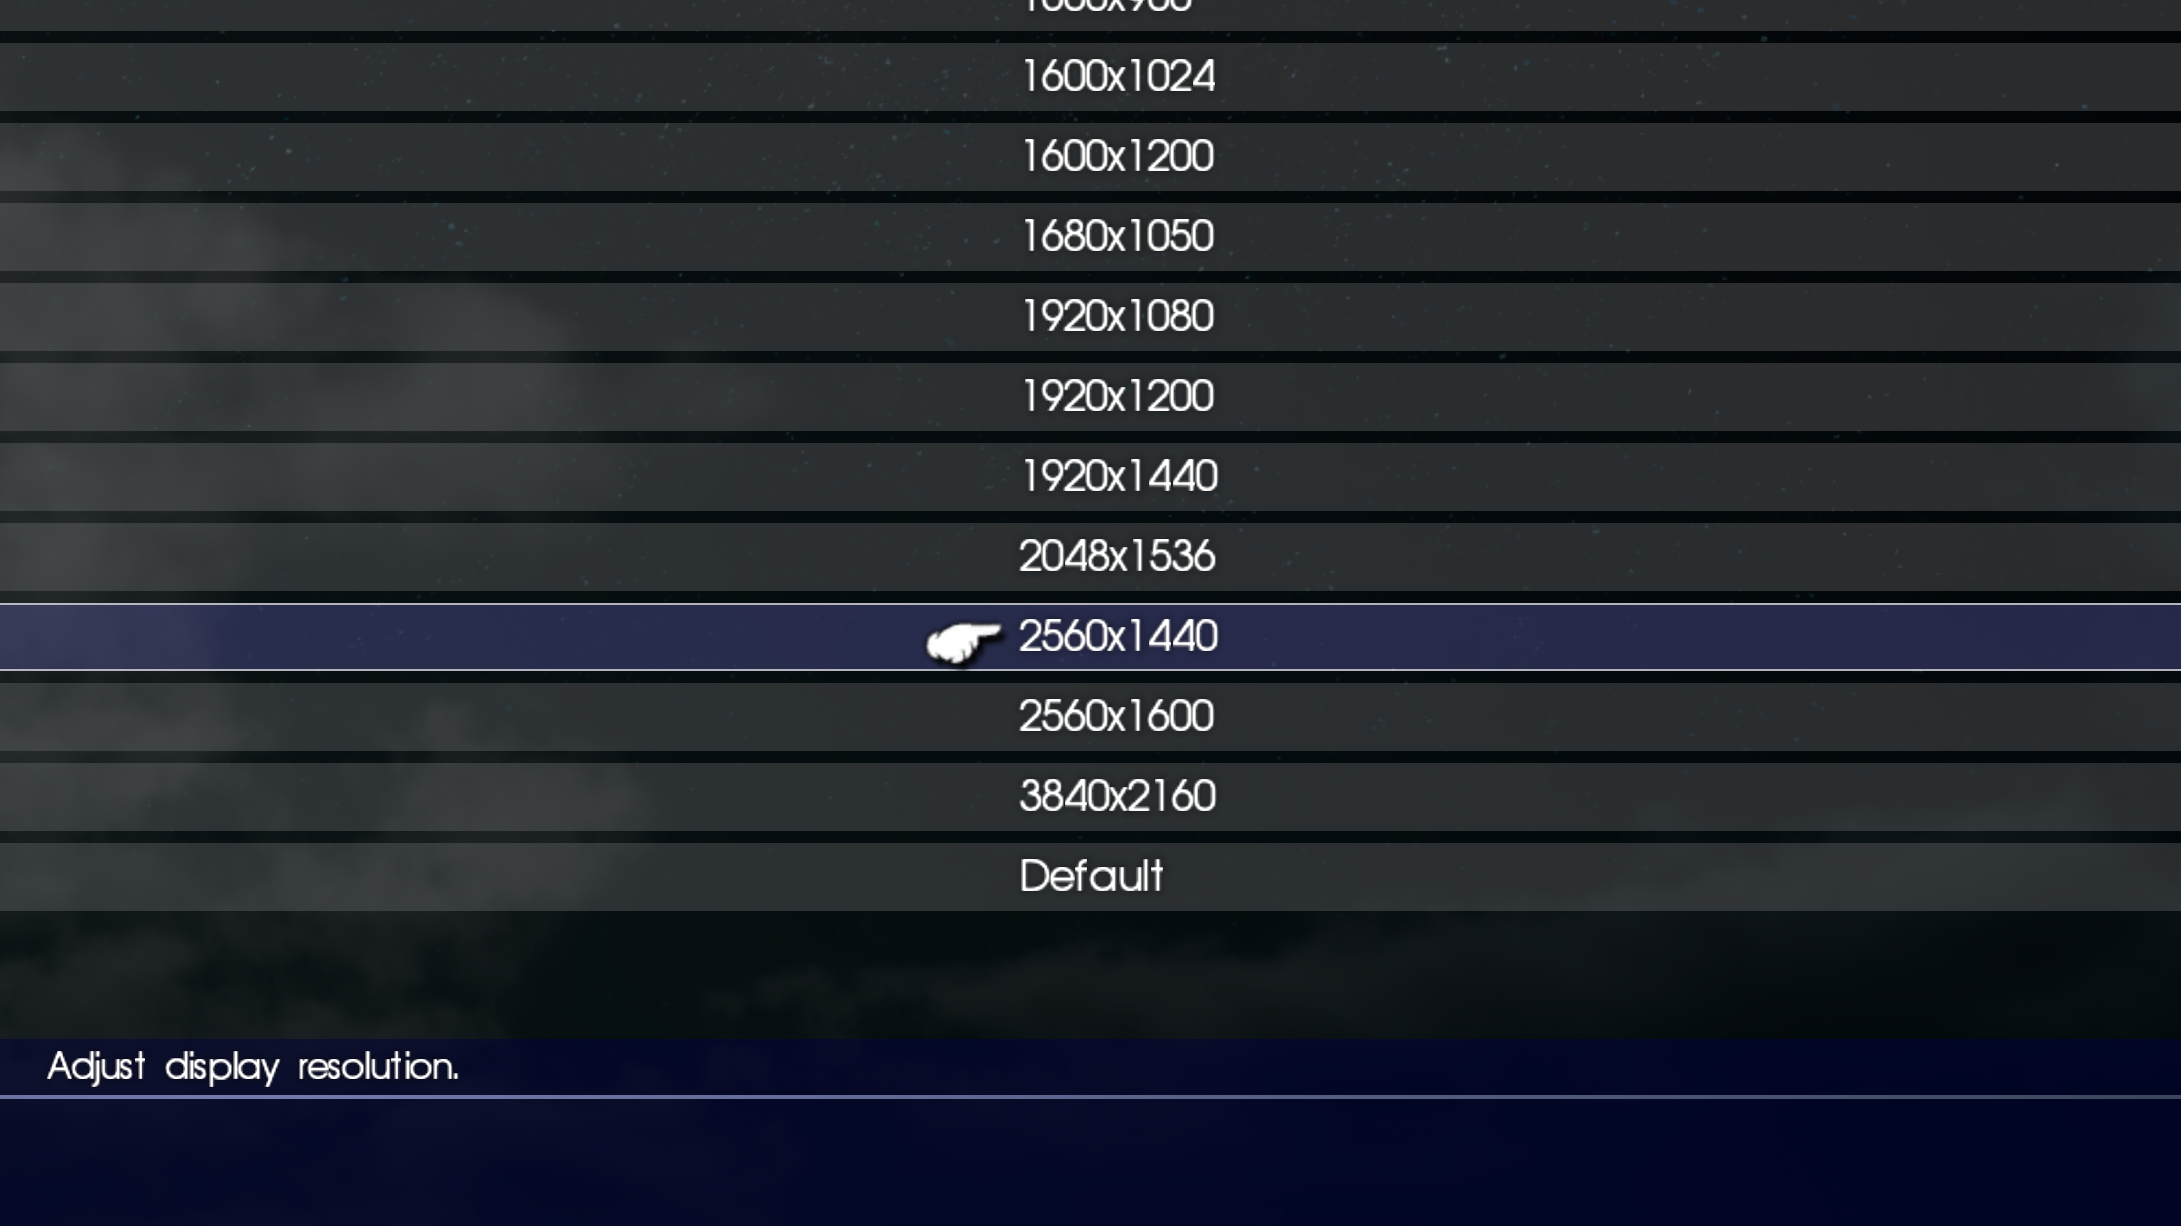 A partial, zoomed-in screenshot of the display resolution page in Final Fantasy XV's settings menu.